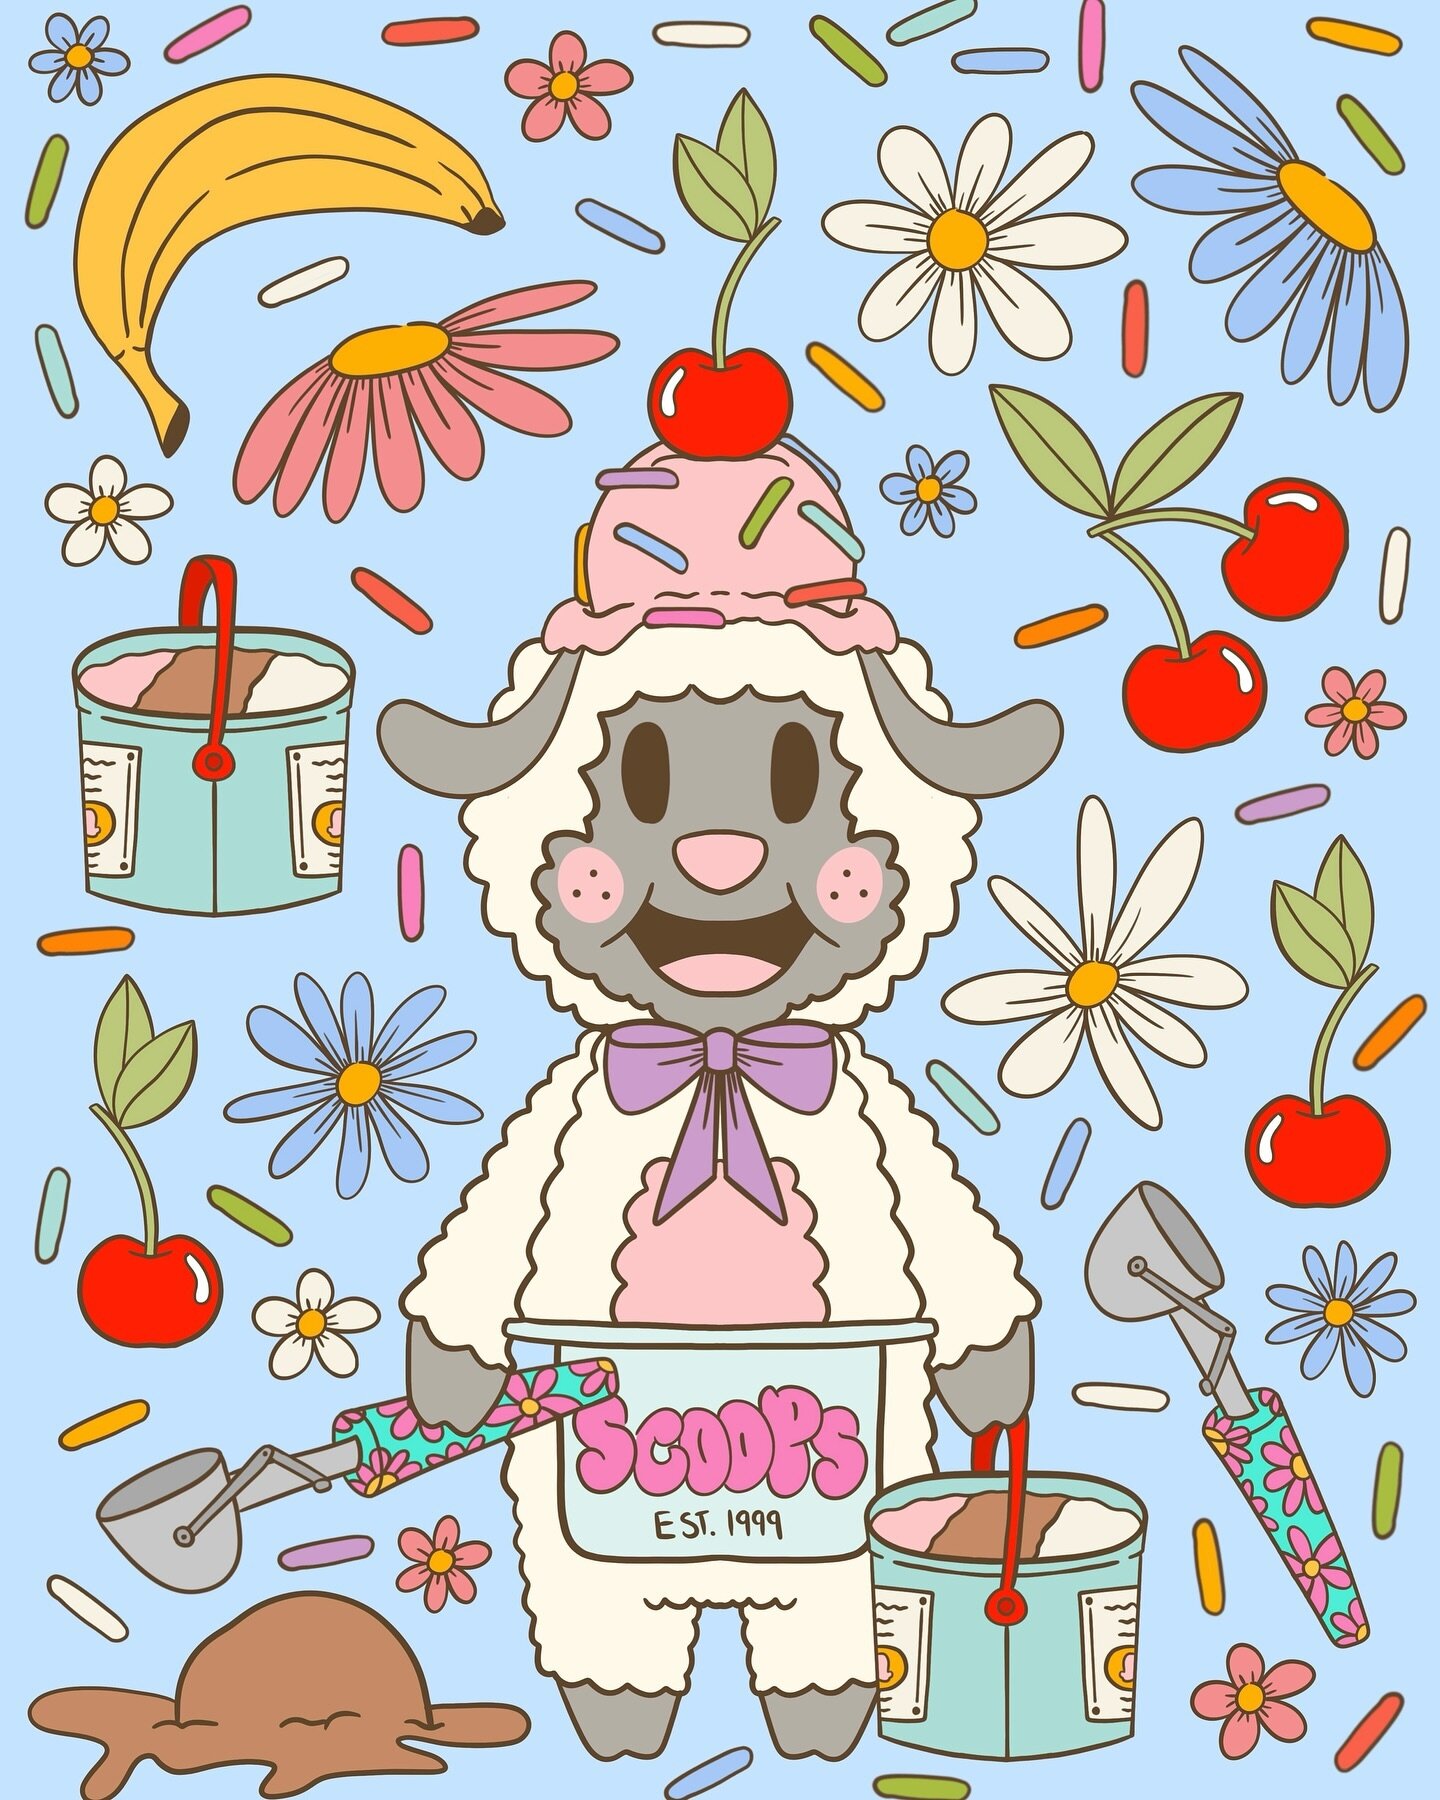 I&rsquo;ve been working on creating some new charact art concepts during the holiday break! This cute lamb illustration features tons of cute little details surround my kawaii little lamb! He&rsquo;s ready to scoop up some yummy ice cream! And he&rsq